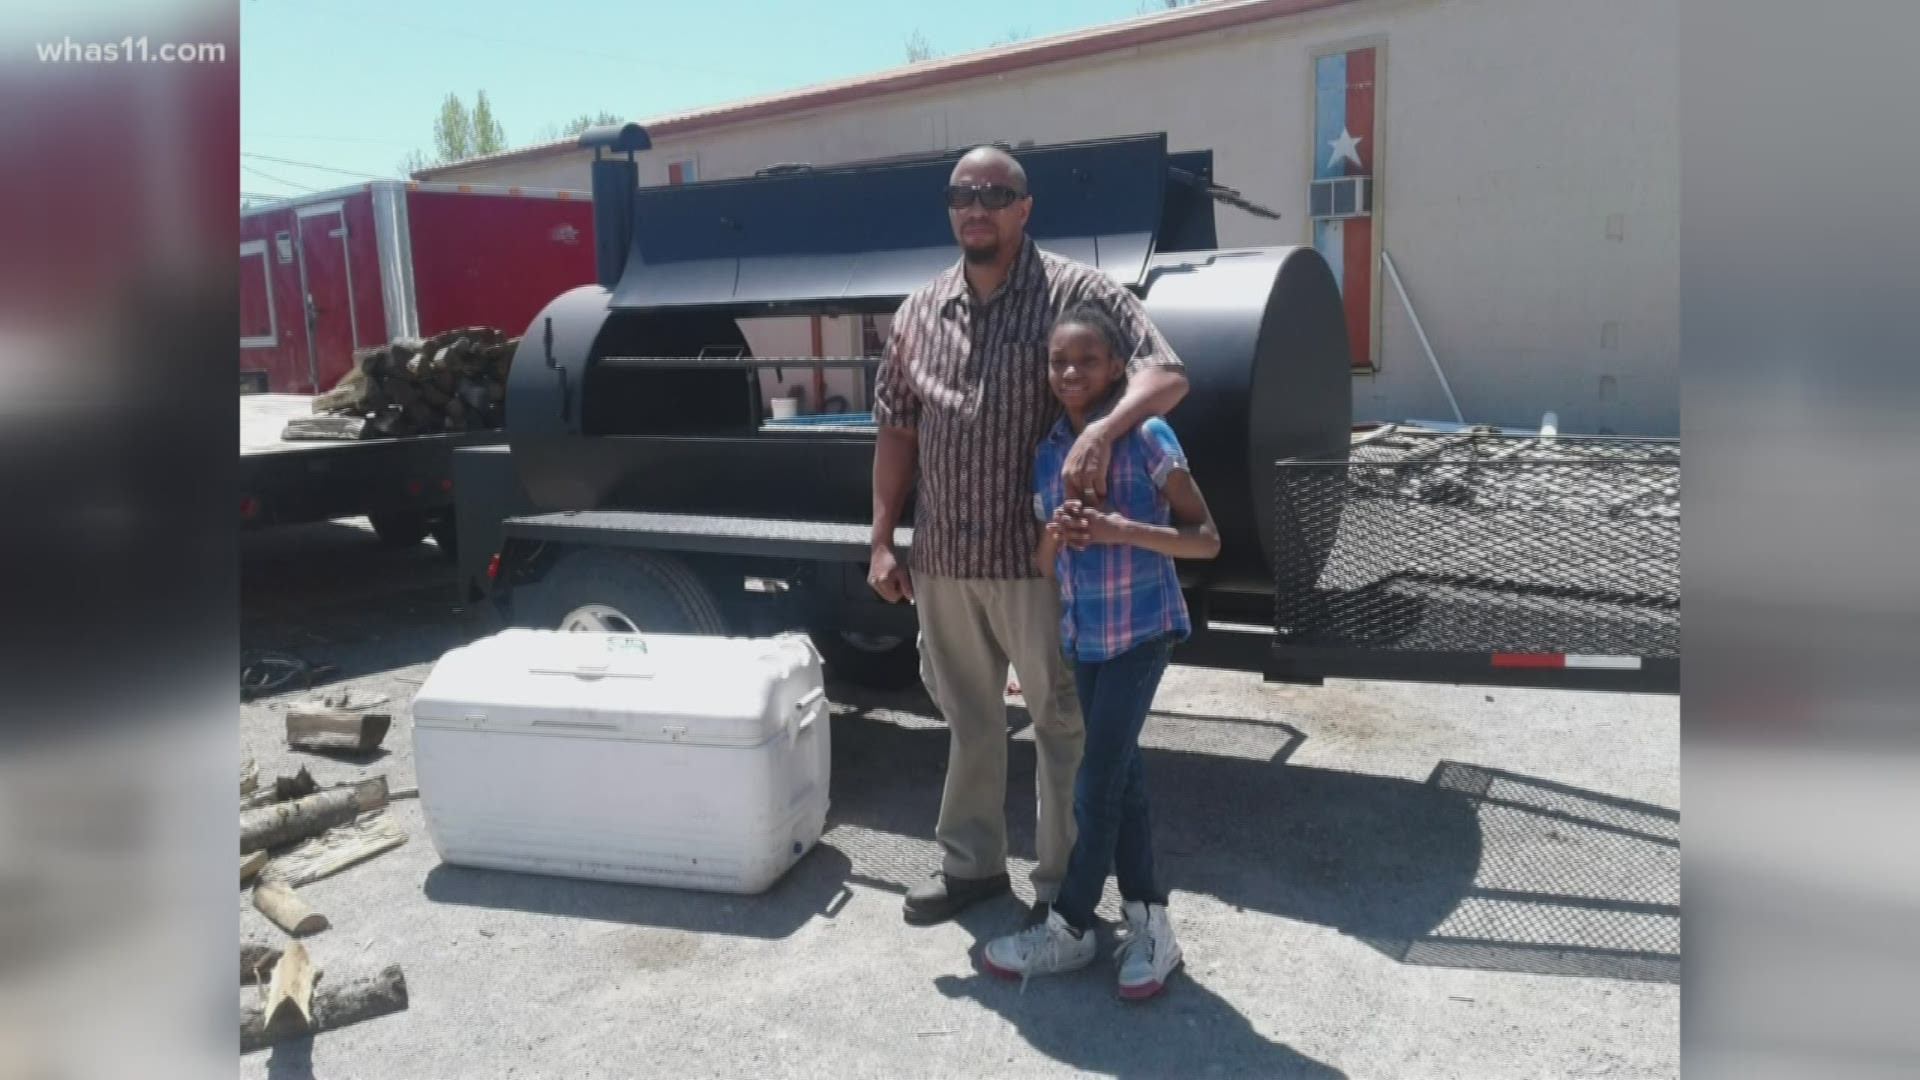 LaFond "BBQ Boss" Wright's BBQ smoker was stolen just 10 days before his business opens.